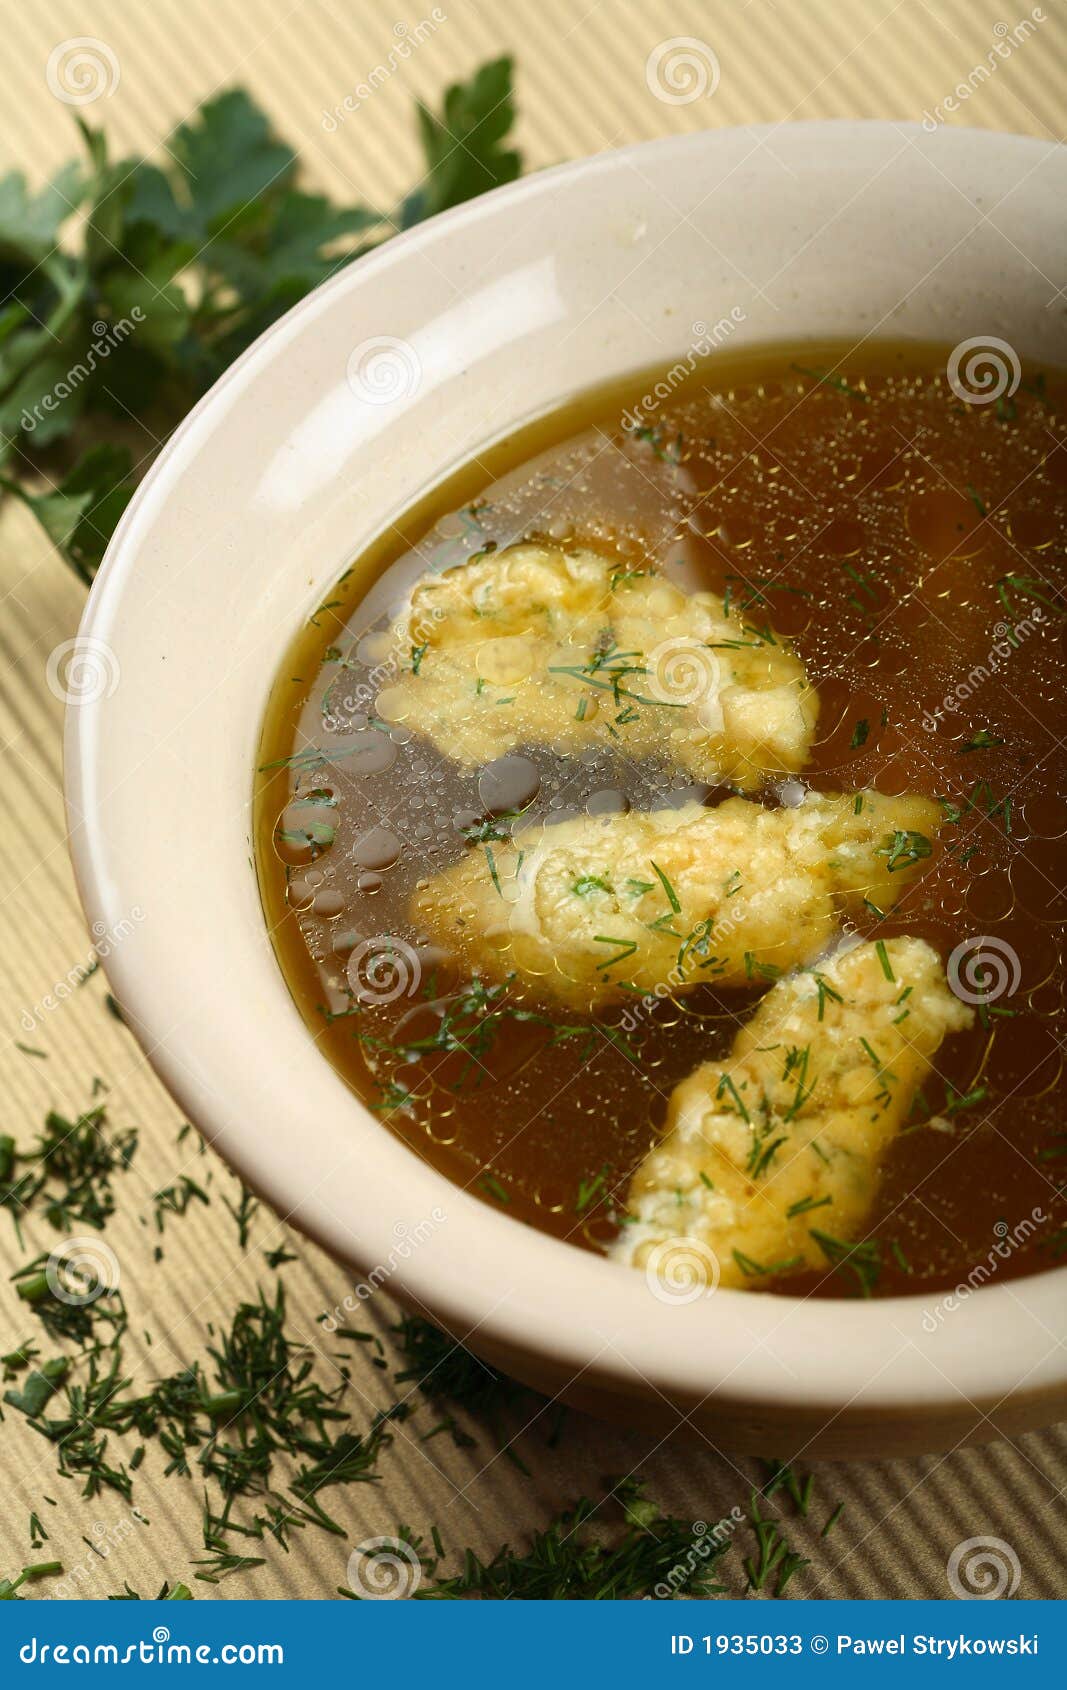 bouillon with herbs